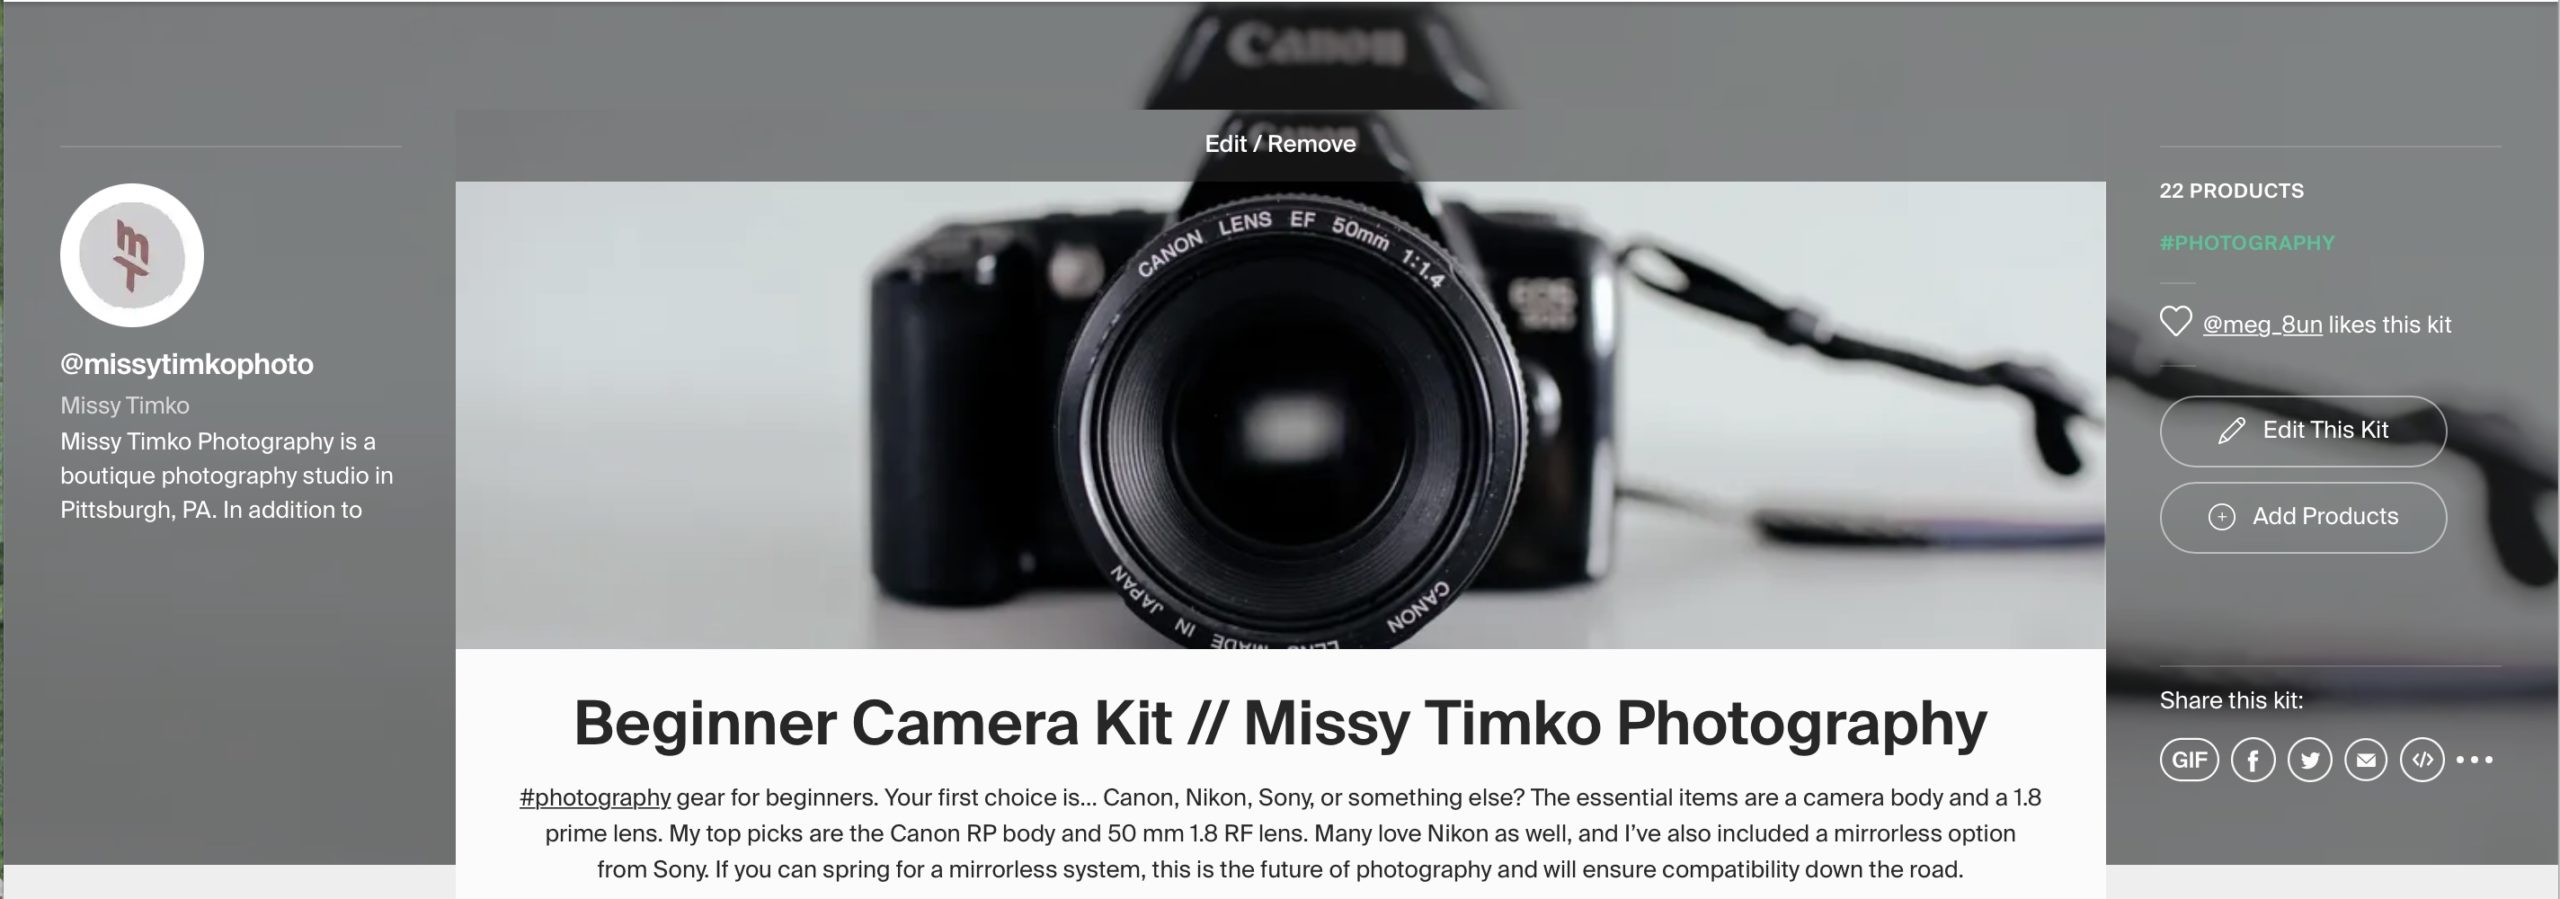 Banner for Missy's kit.co camera recommendations